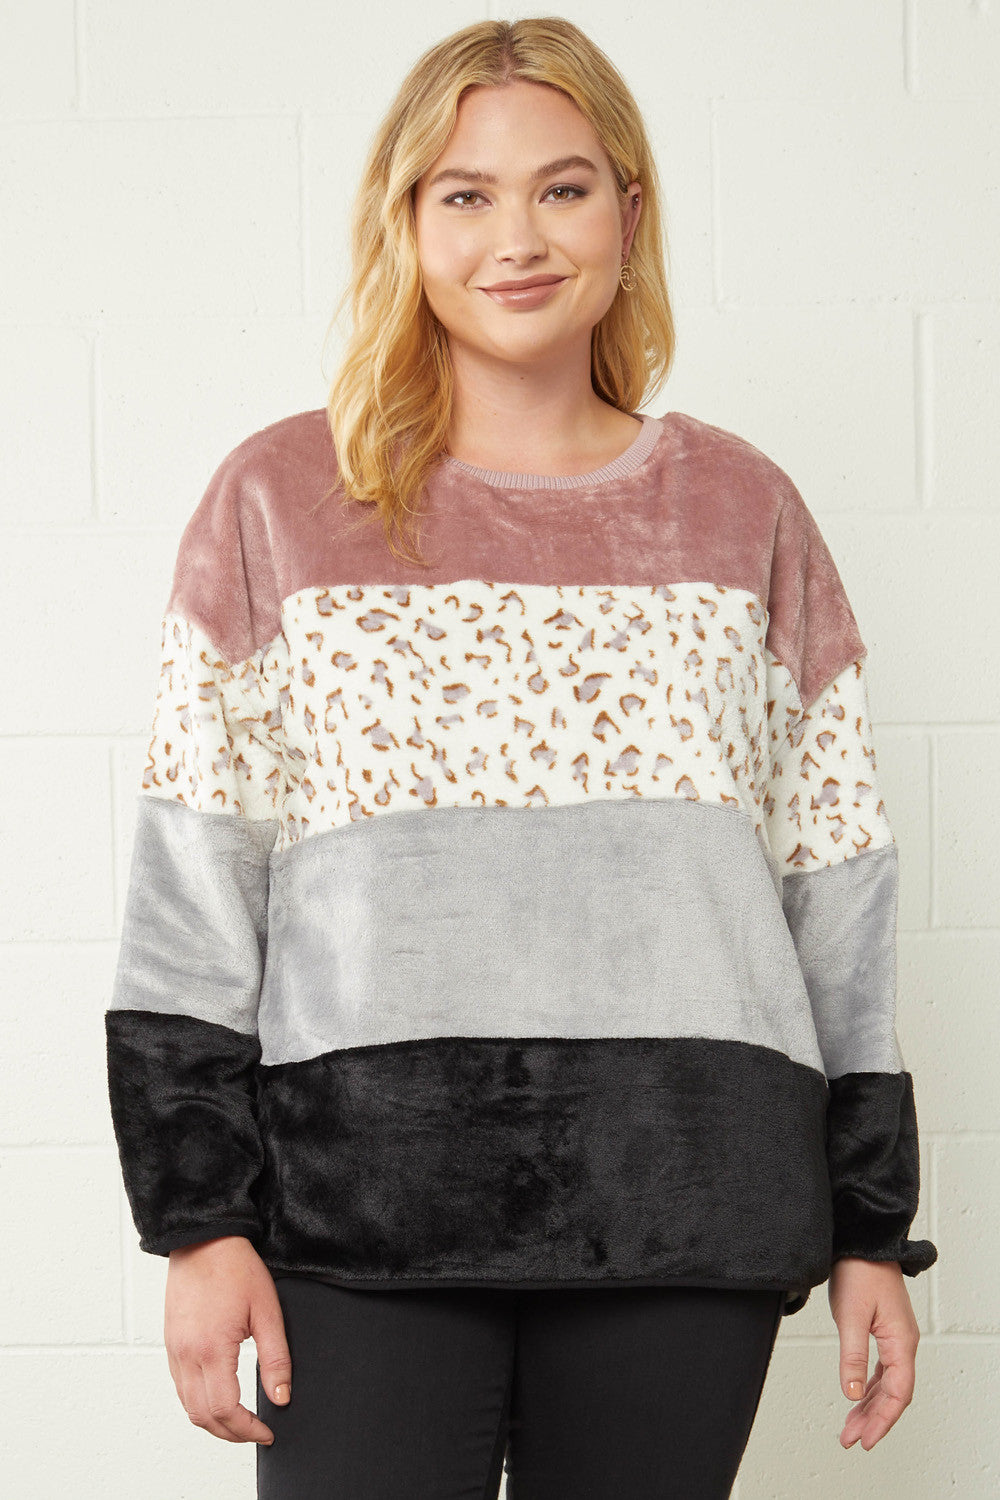 Cozy on the couch sweatshirt- plus size